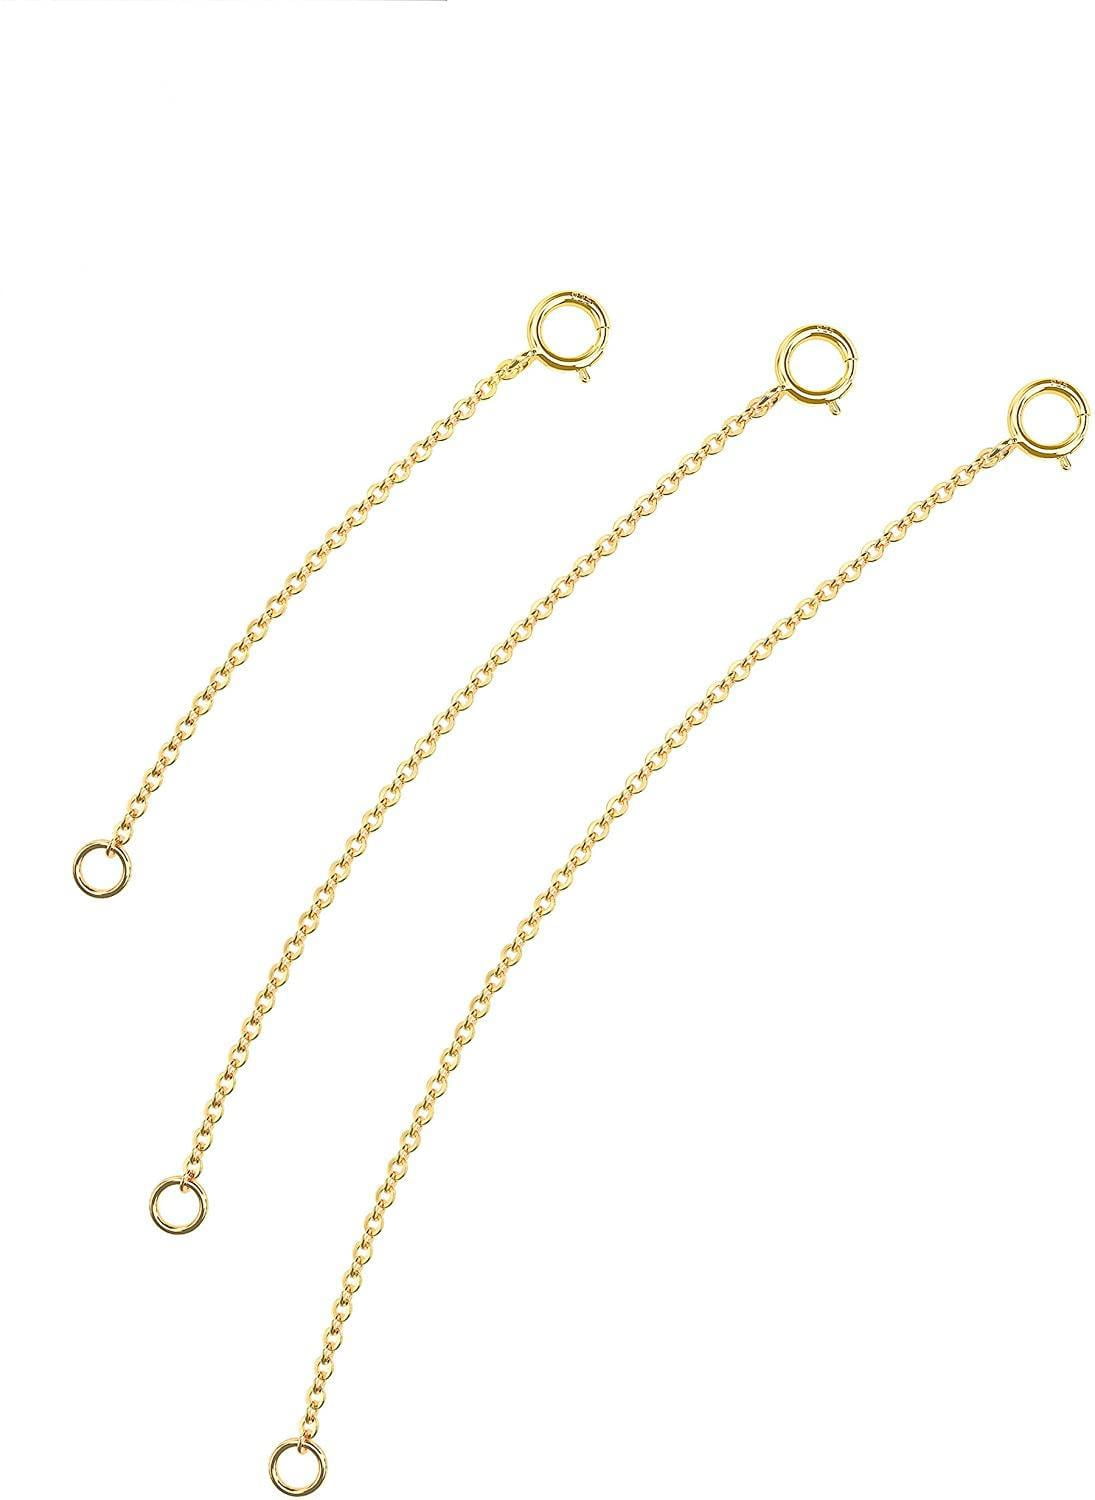 Necklace Extenders Gold Chain Extenders for Necklaces Extensions